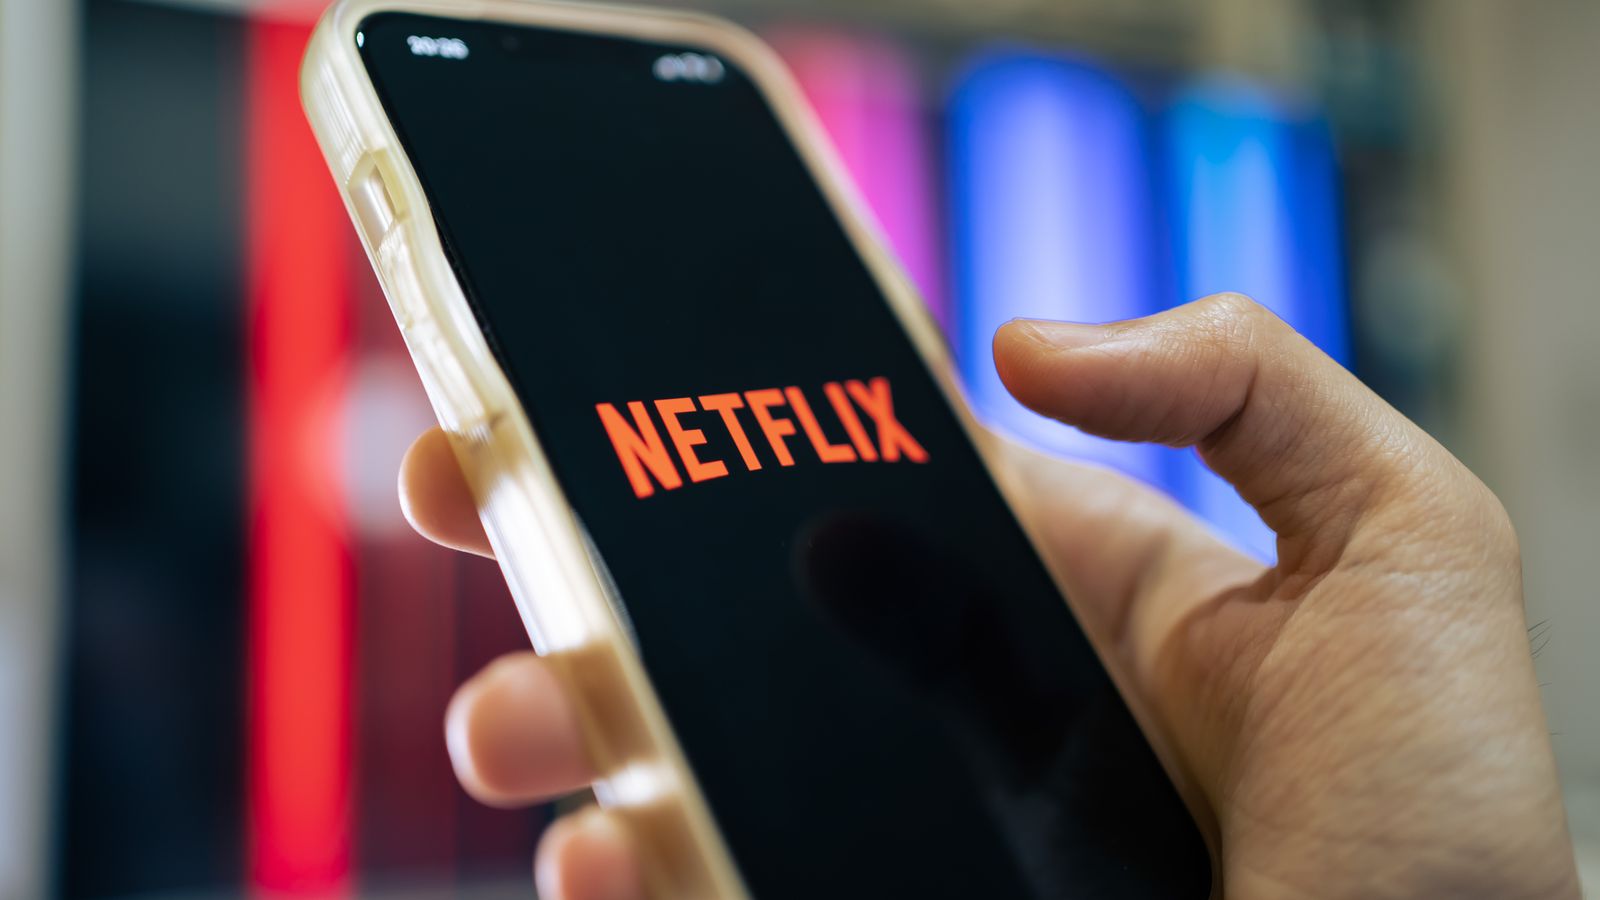 Netflix cuts prices in more than 30 countries in bid to win more subscribers